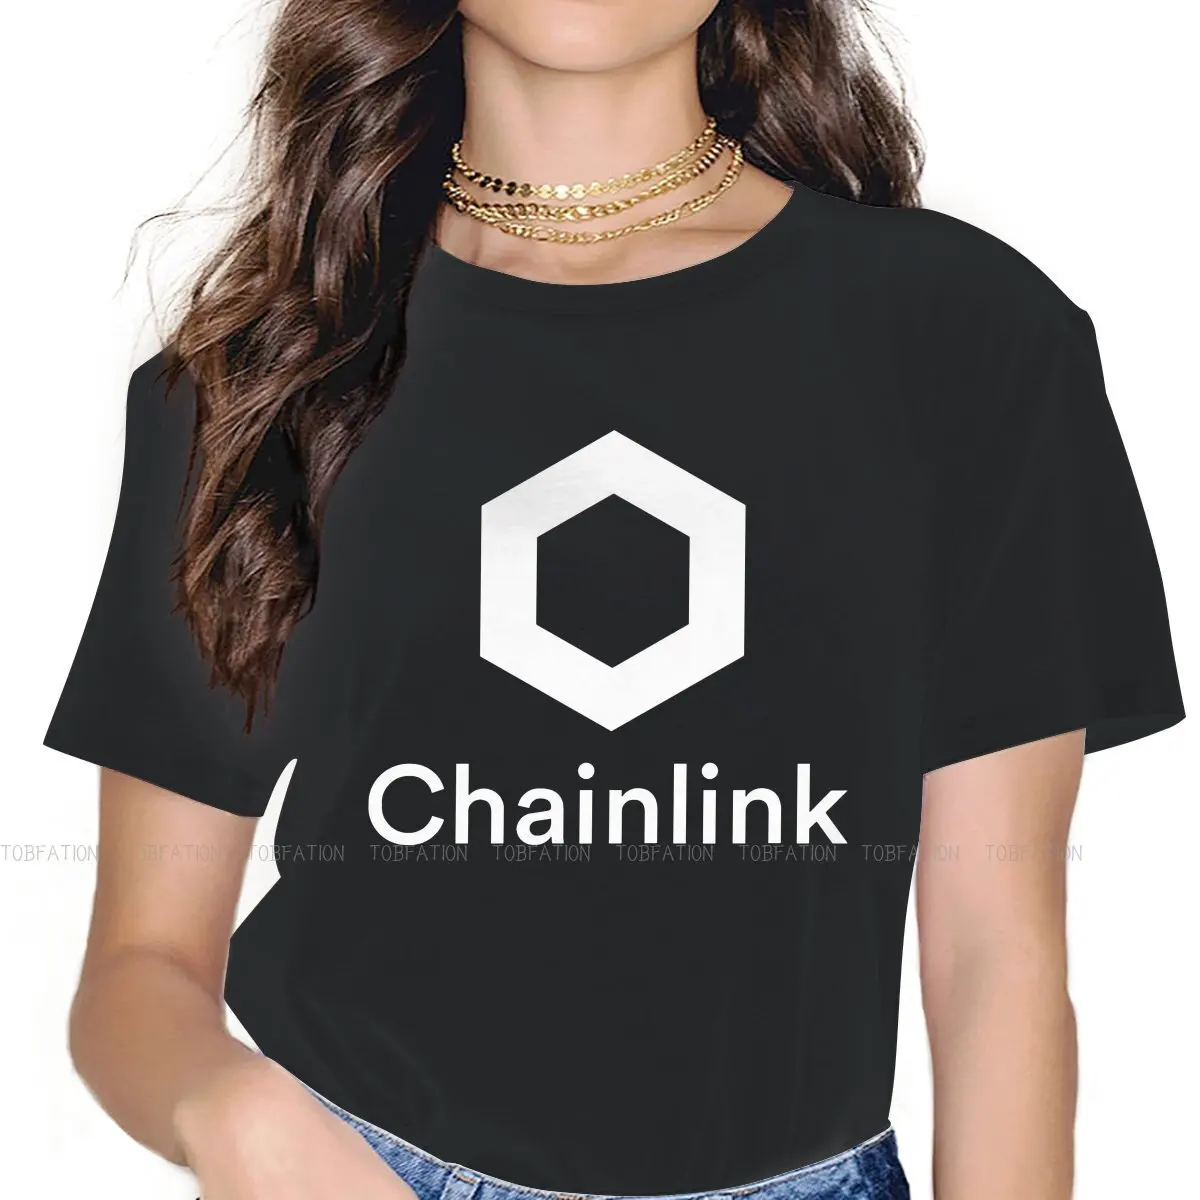 

ChainLink Crypto Link Coin Crytopcurrency Blockchain TShirt for Woman Girl White 5XL Summer Sweatshirts T Shirt Novelty Fluffy